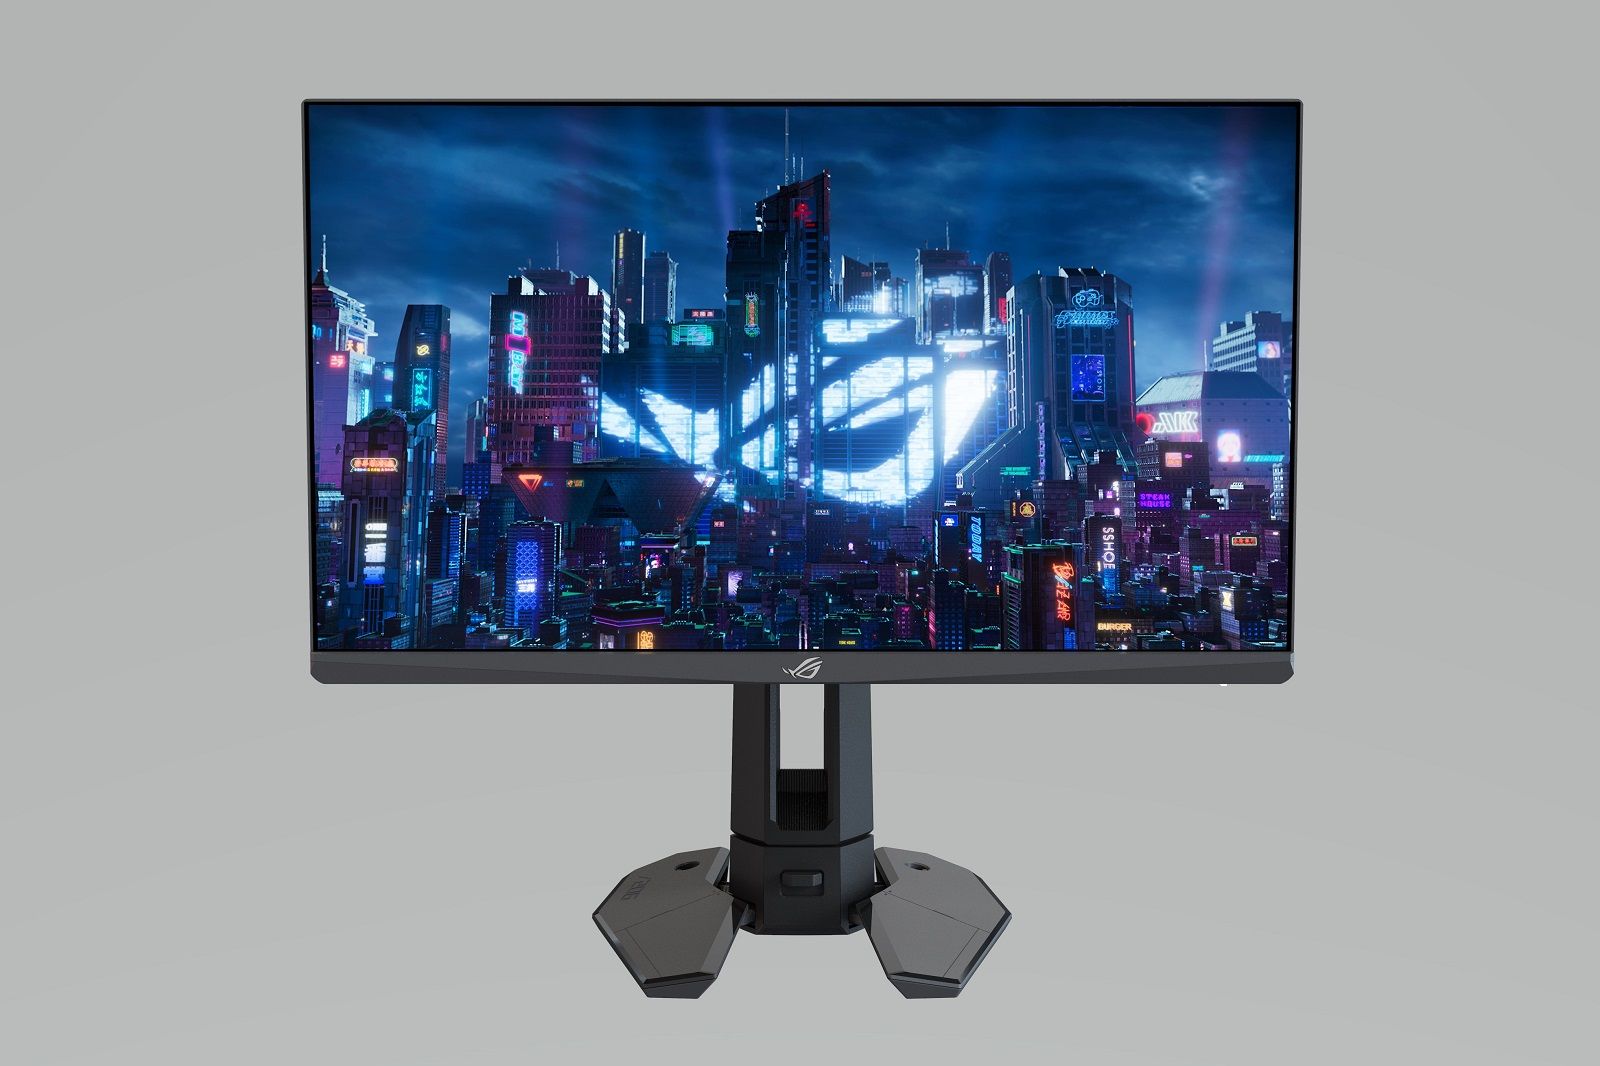 Asus gaming monitors now include an insane 540 Hz display photo 1